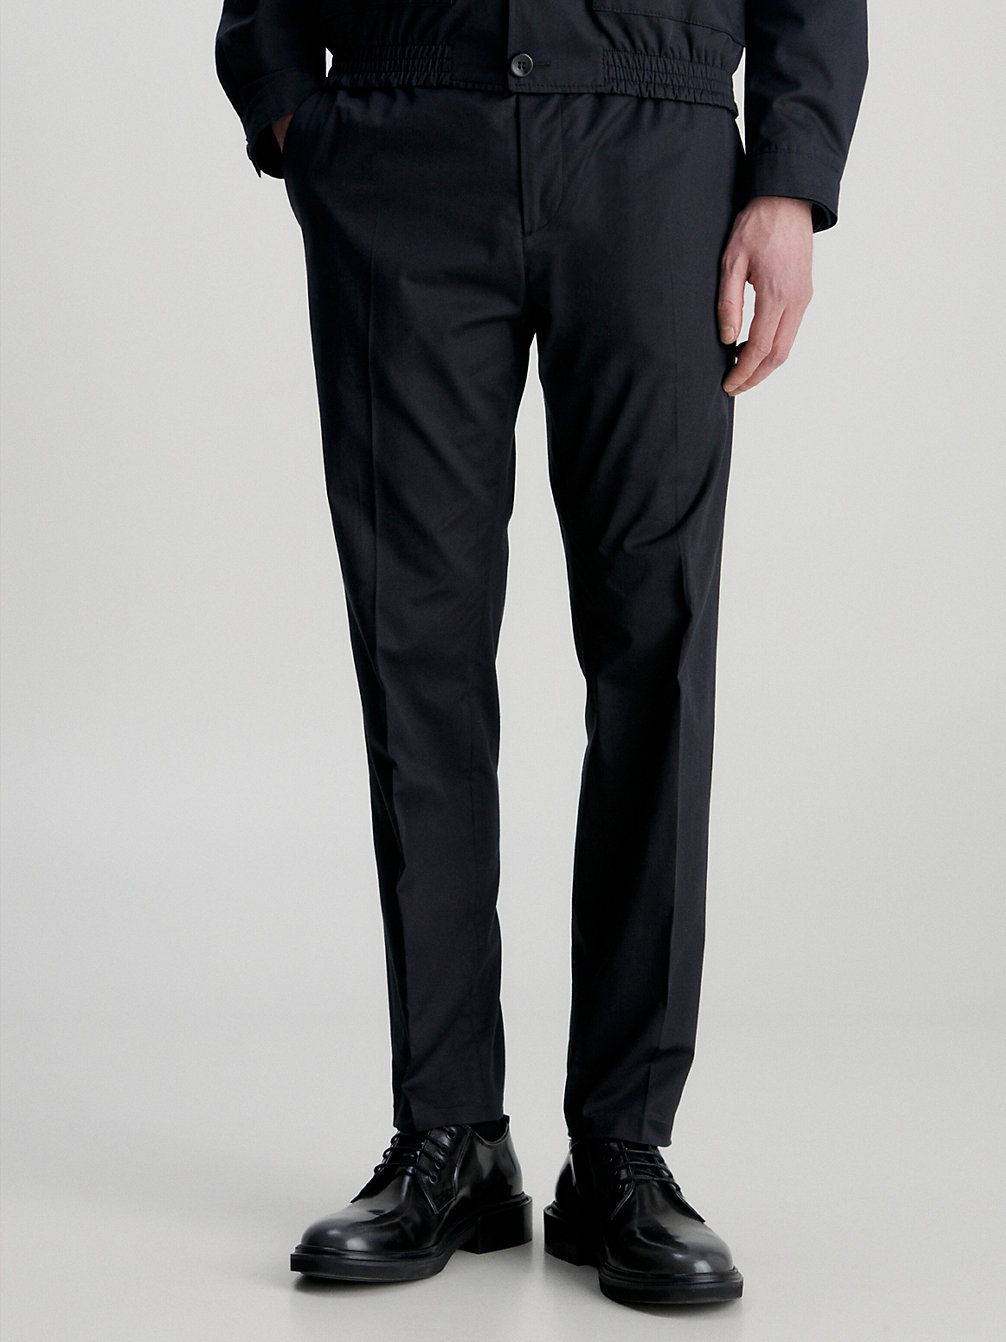 CK BLACK Slim Cropped Seacell Trousers undefined men Calvin Klein